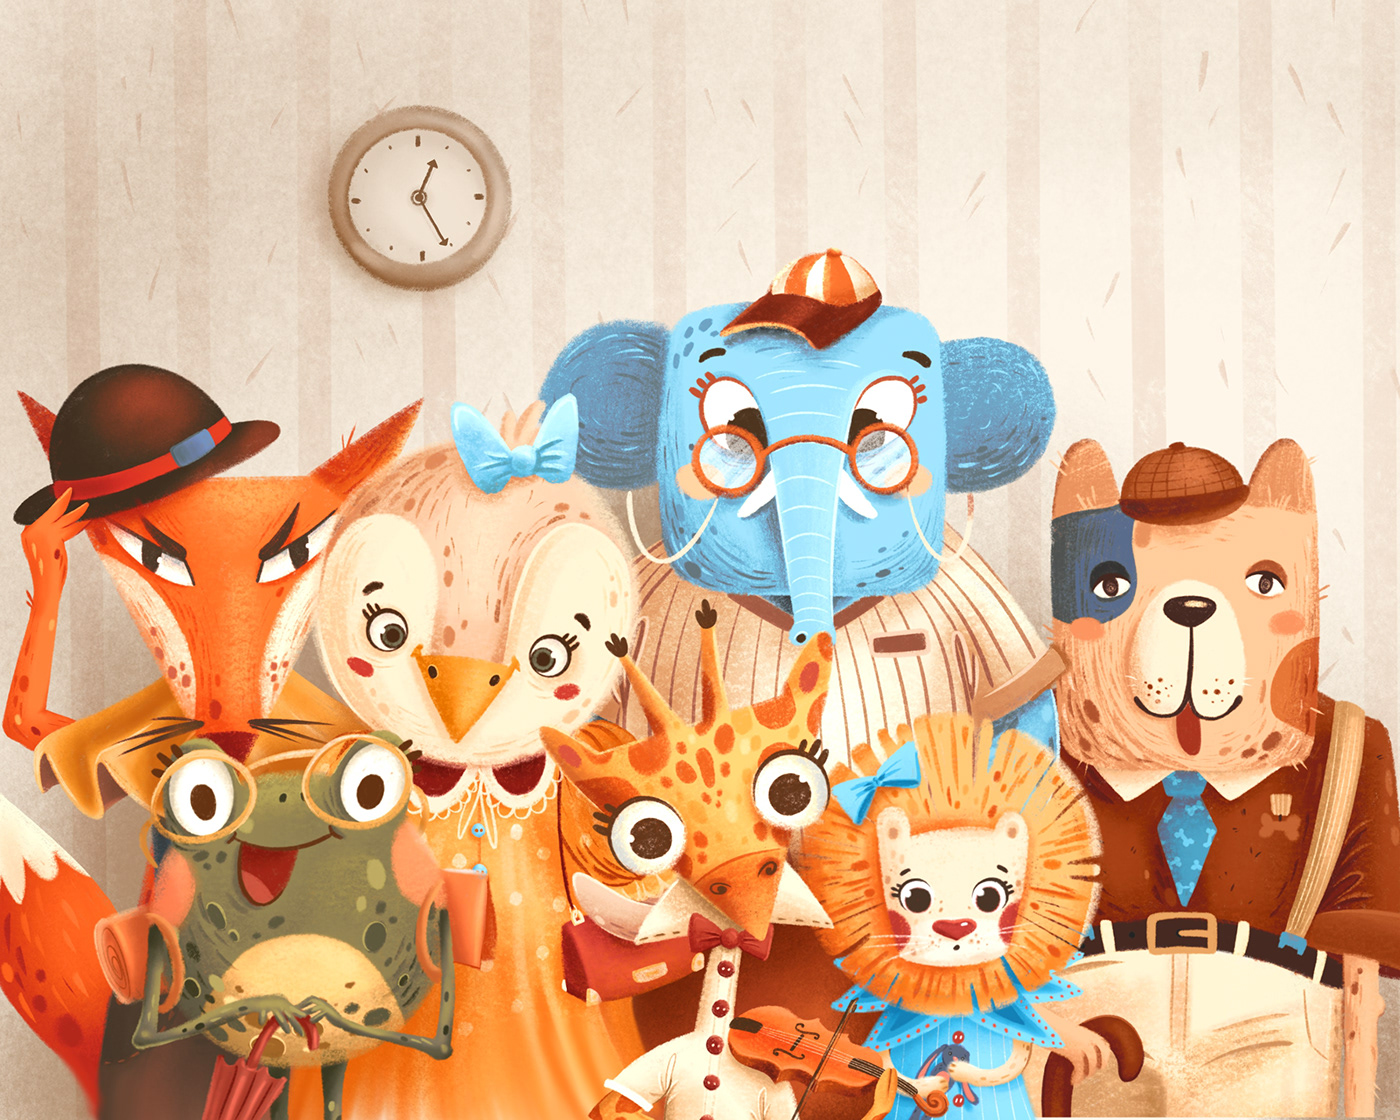 Character Character design  character illustration ILLUSTRATION  children illustration cartoon cartoon character animals animals illustration animals characters 